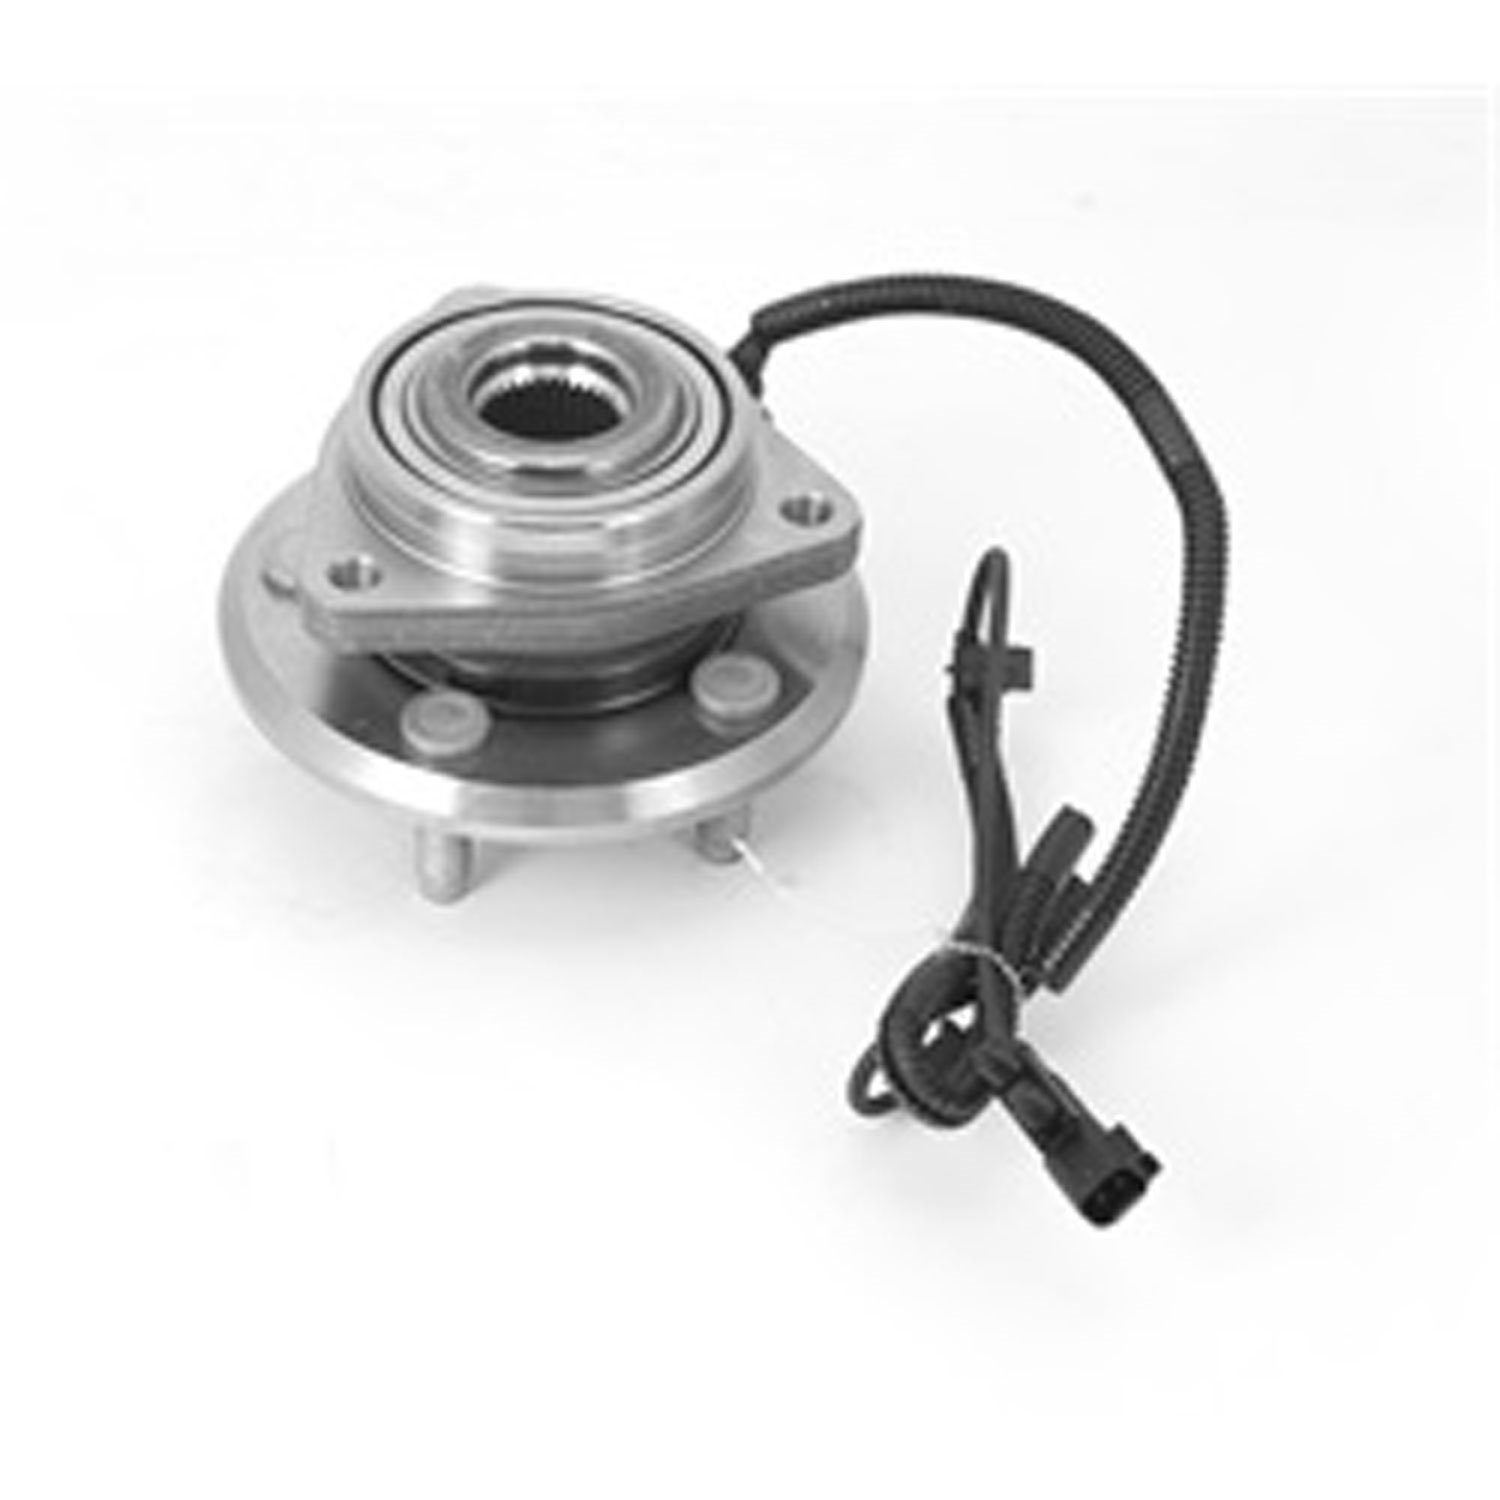 Stock replacement front axle hub and bearing assembly from Omix-ADA, Fits 08-11 Jeep Liberty KK s.